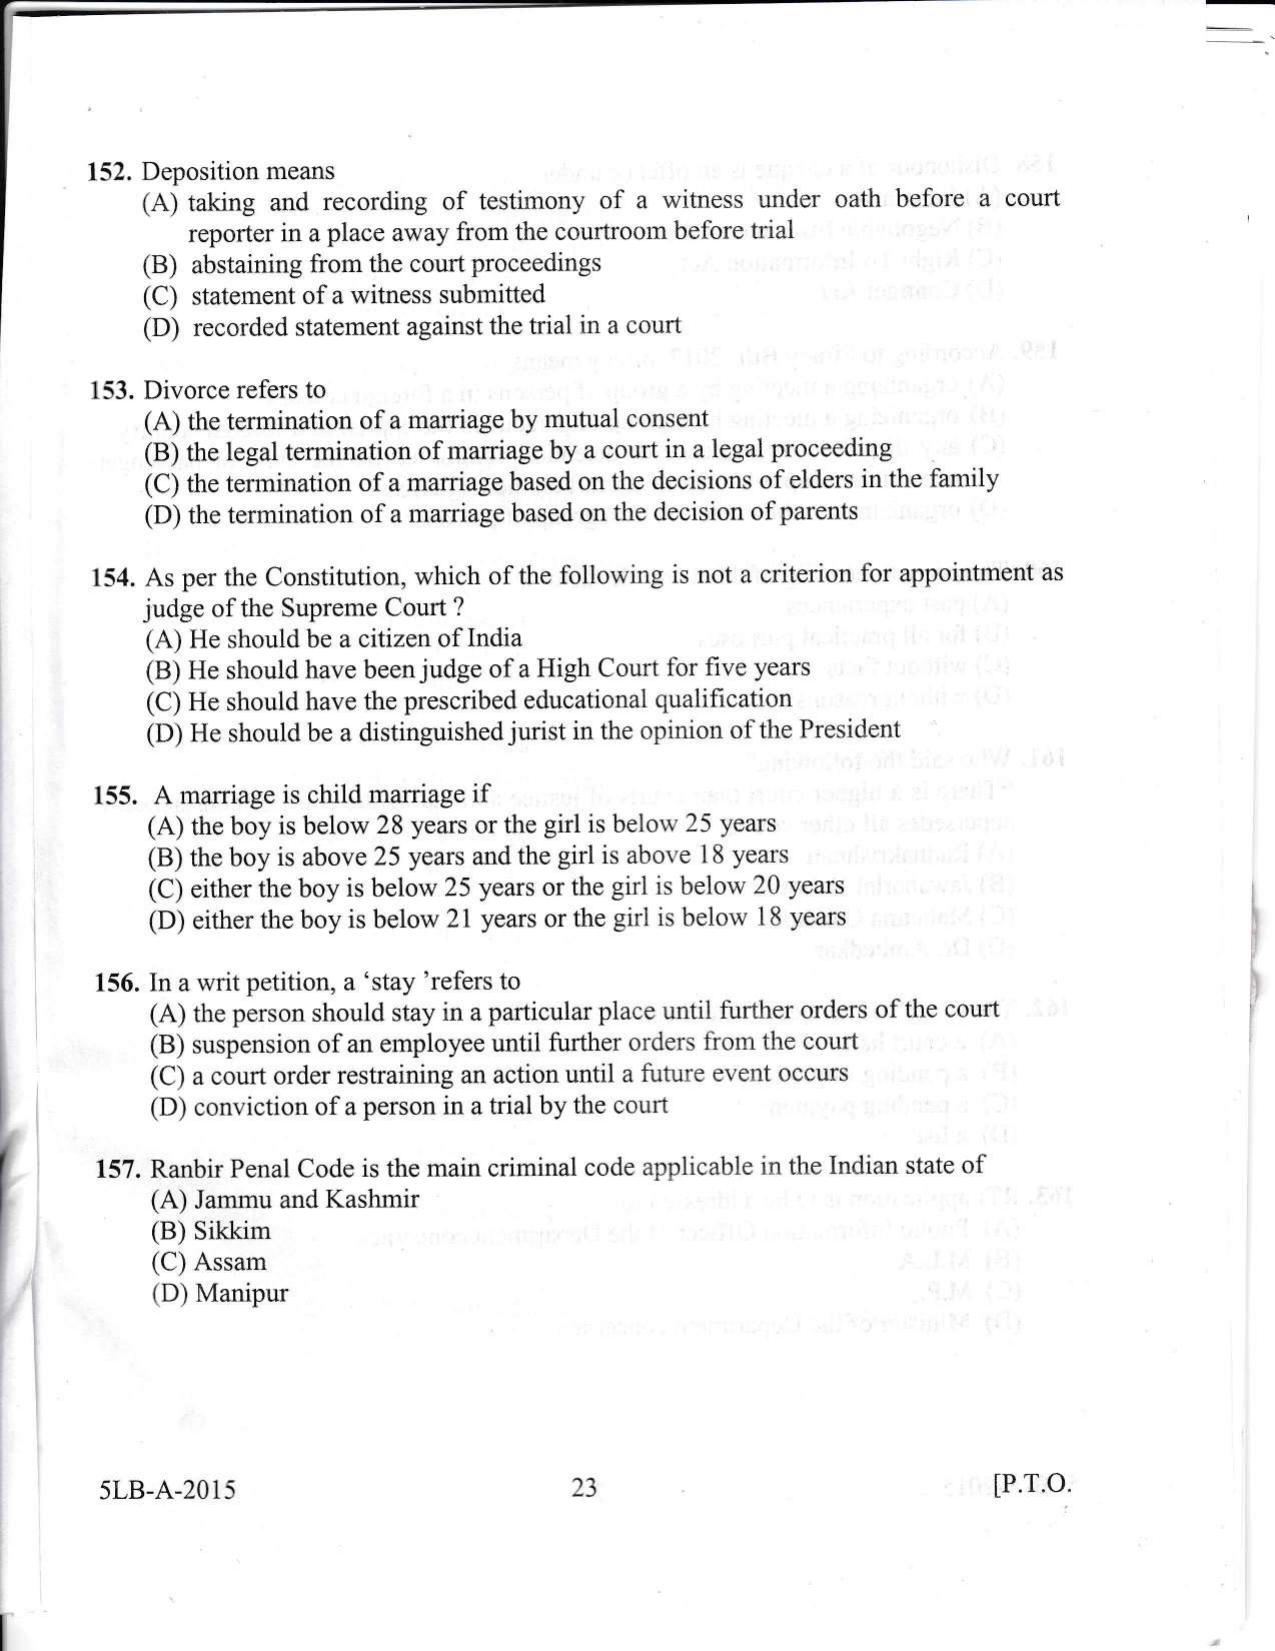 KLEE 5 Year LLB Exam 2015 Question Paper - Page 23